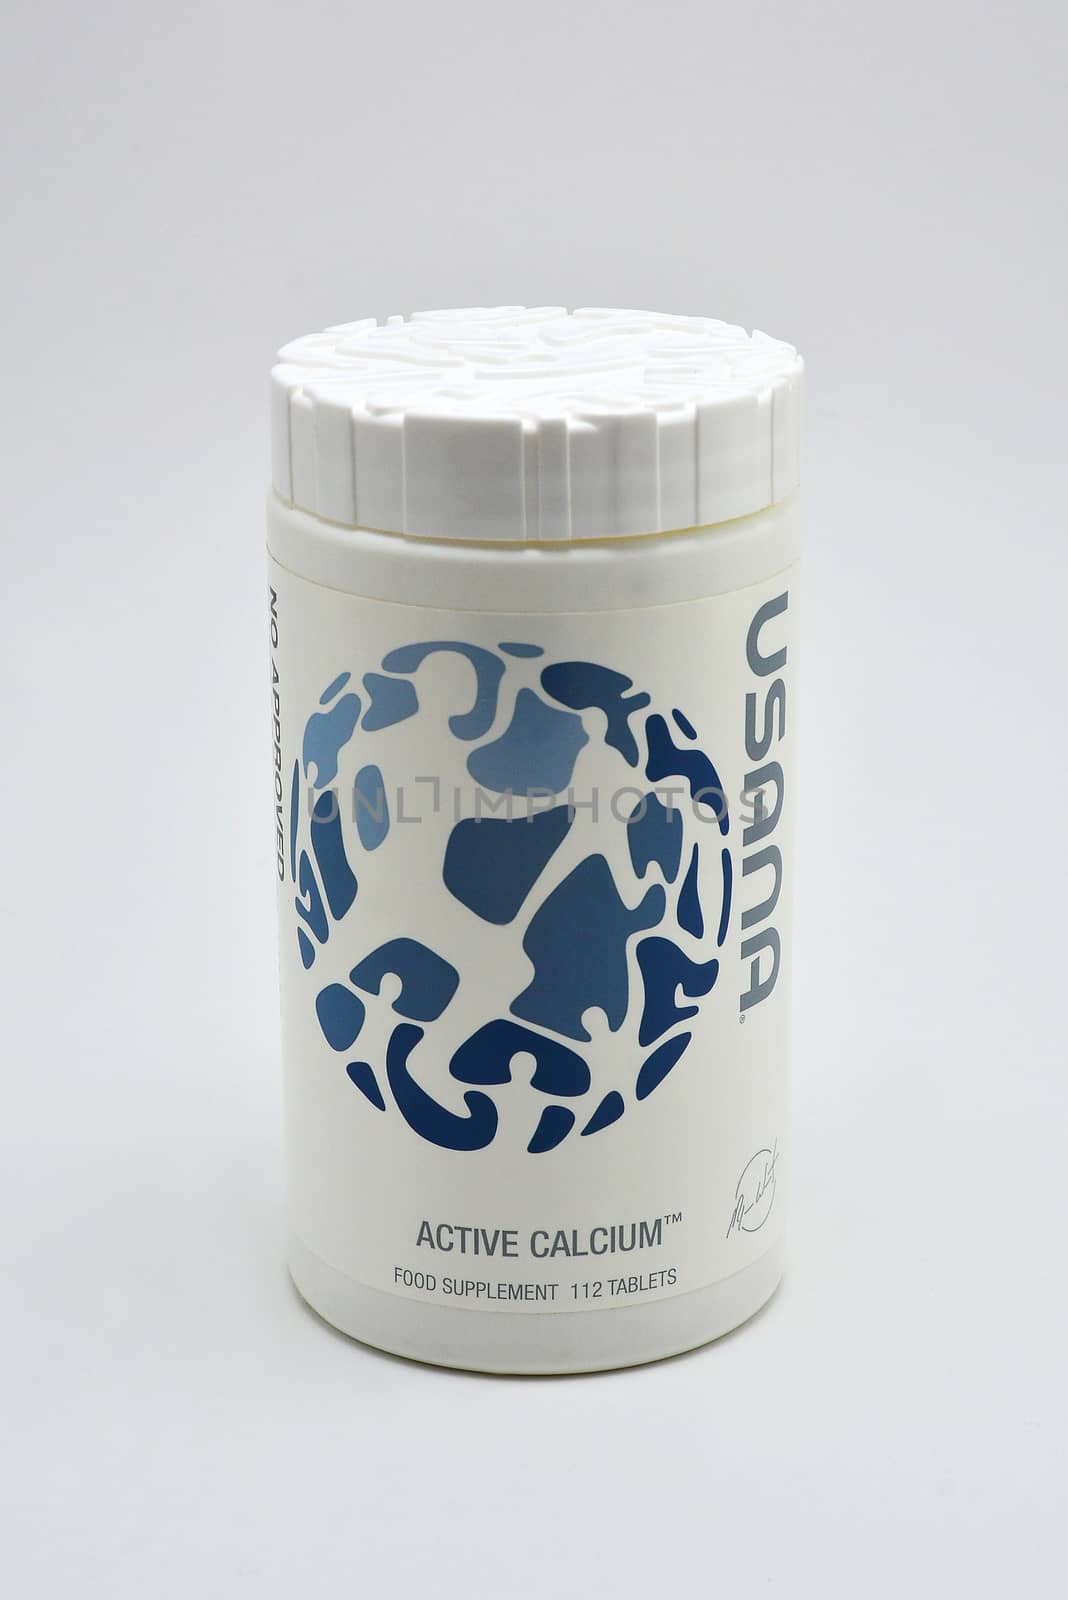 Usana active calcium supplement in Philippines by imwaltersy